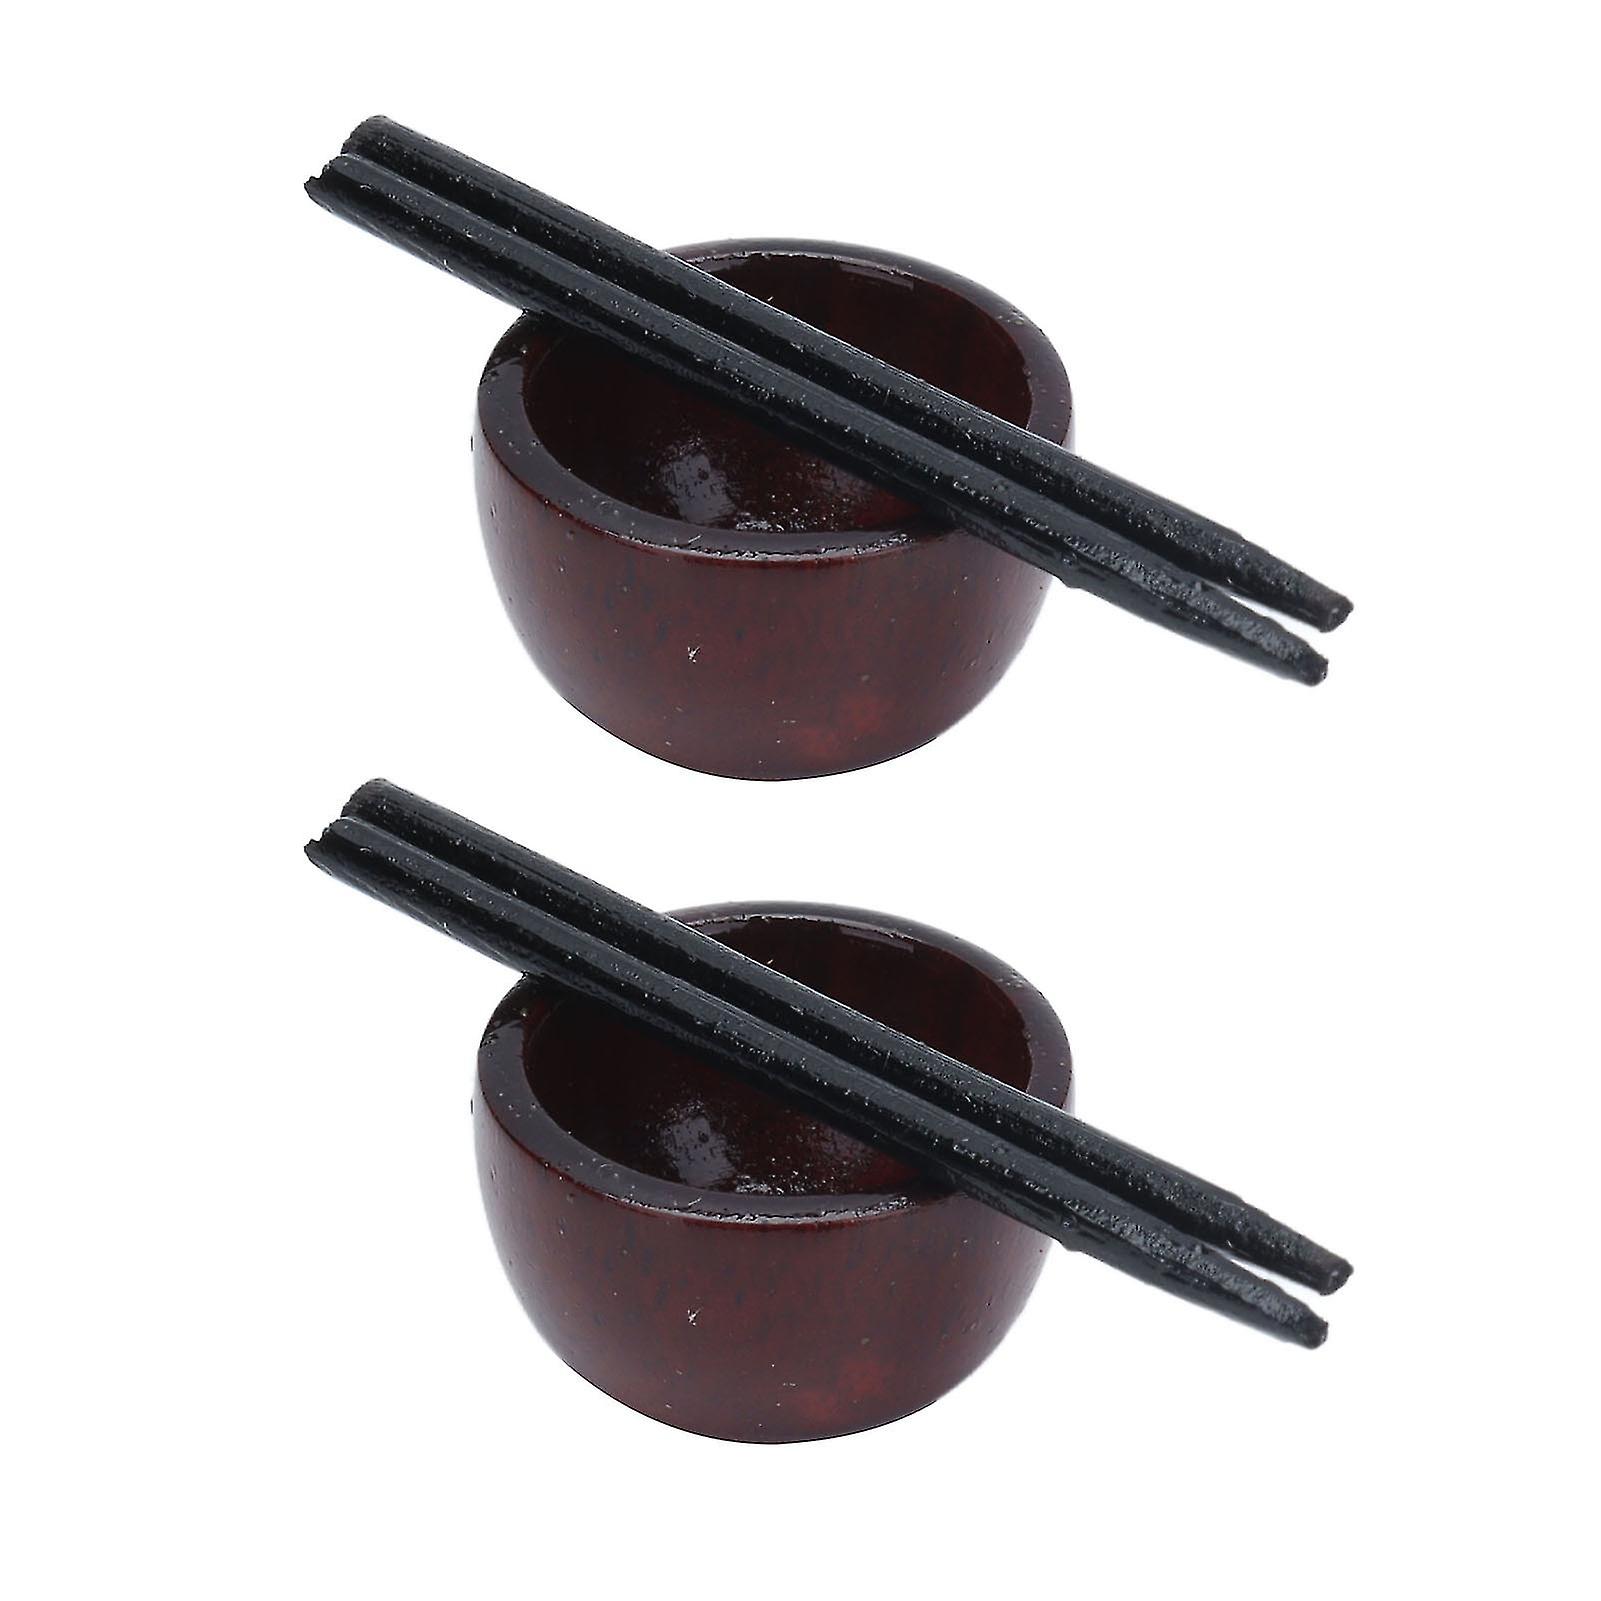 1:12 Dollhouse Bowl and Chopsticks Set Miniature Redwood Retro Doll House Tableware for Dollhouse Kitchen Dining Room